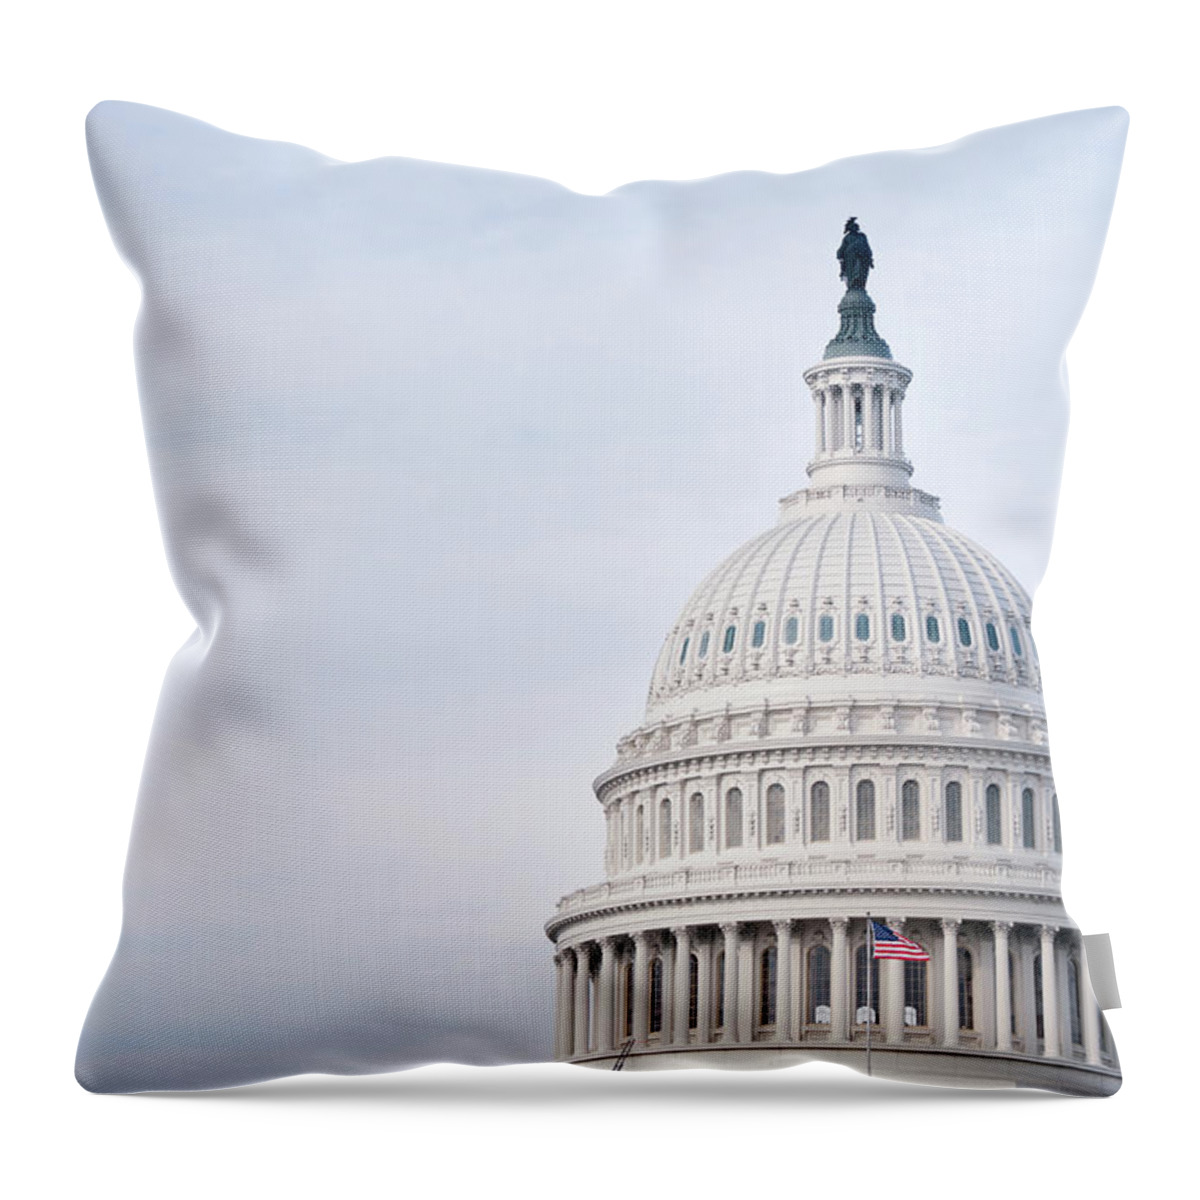 Outdoors Throw Pillow featuring the photograph The United States Capitol In Washington by Code6d